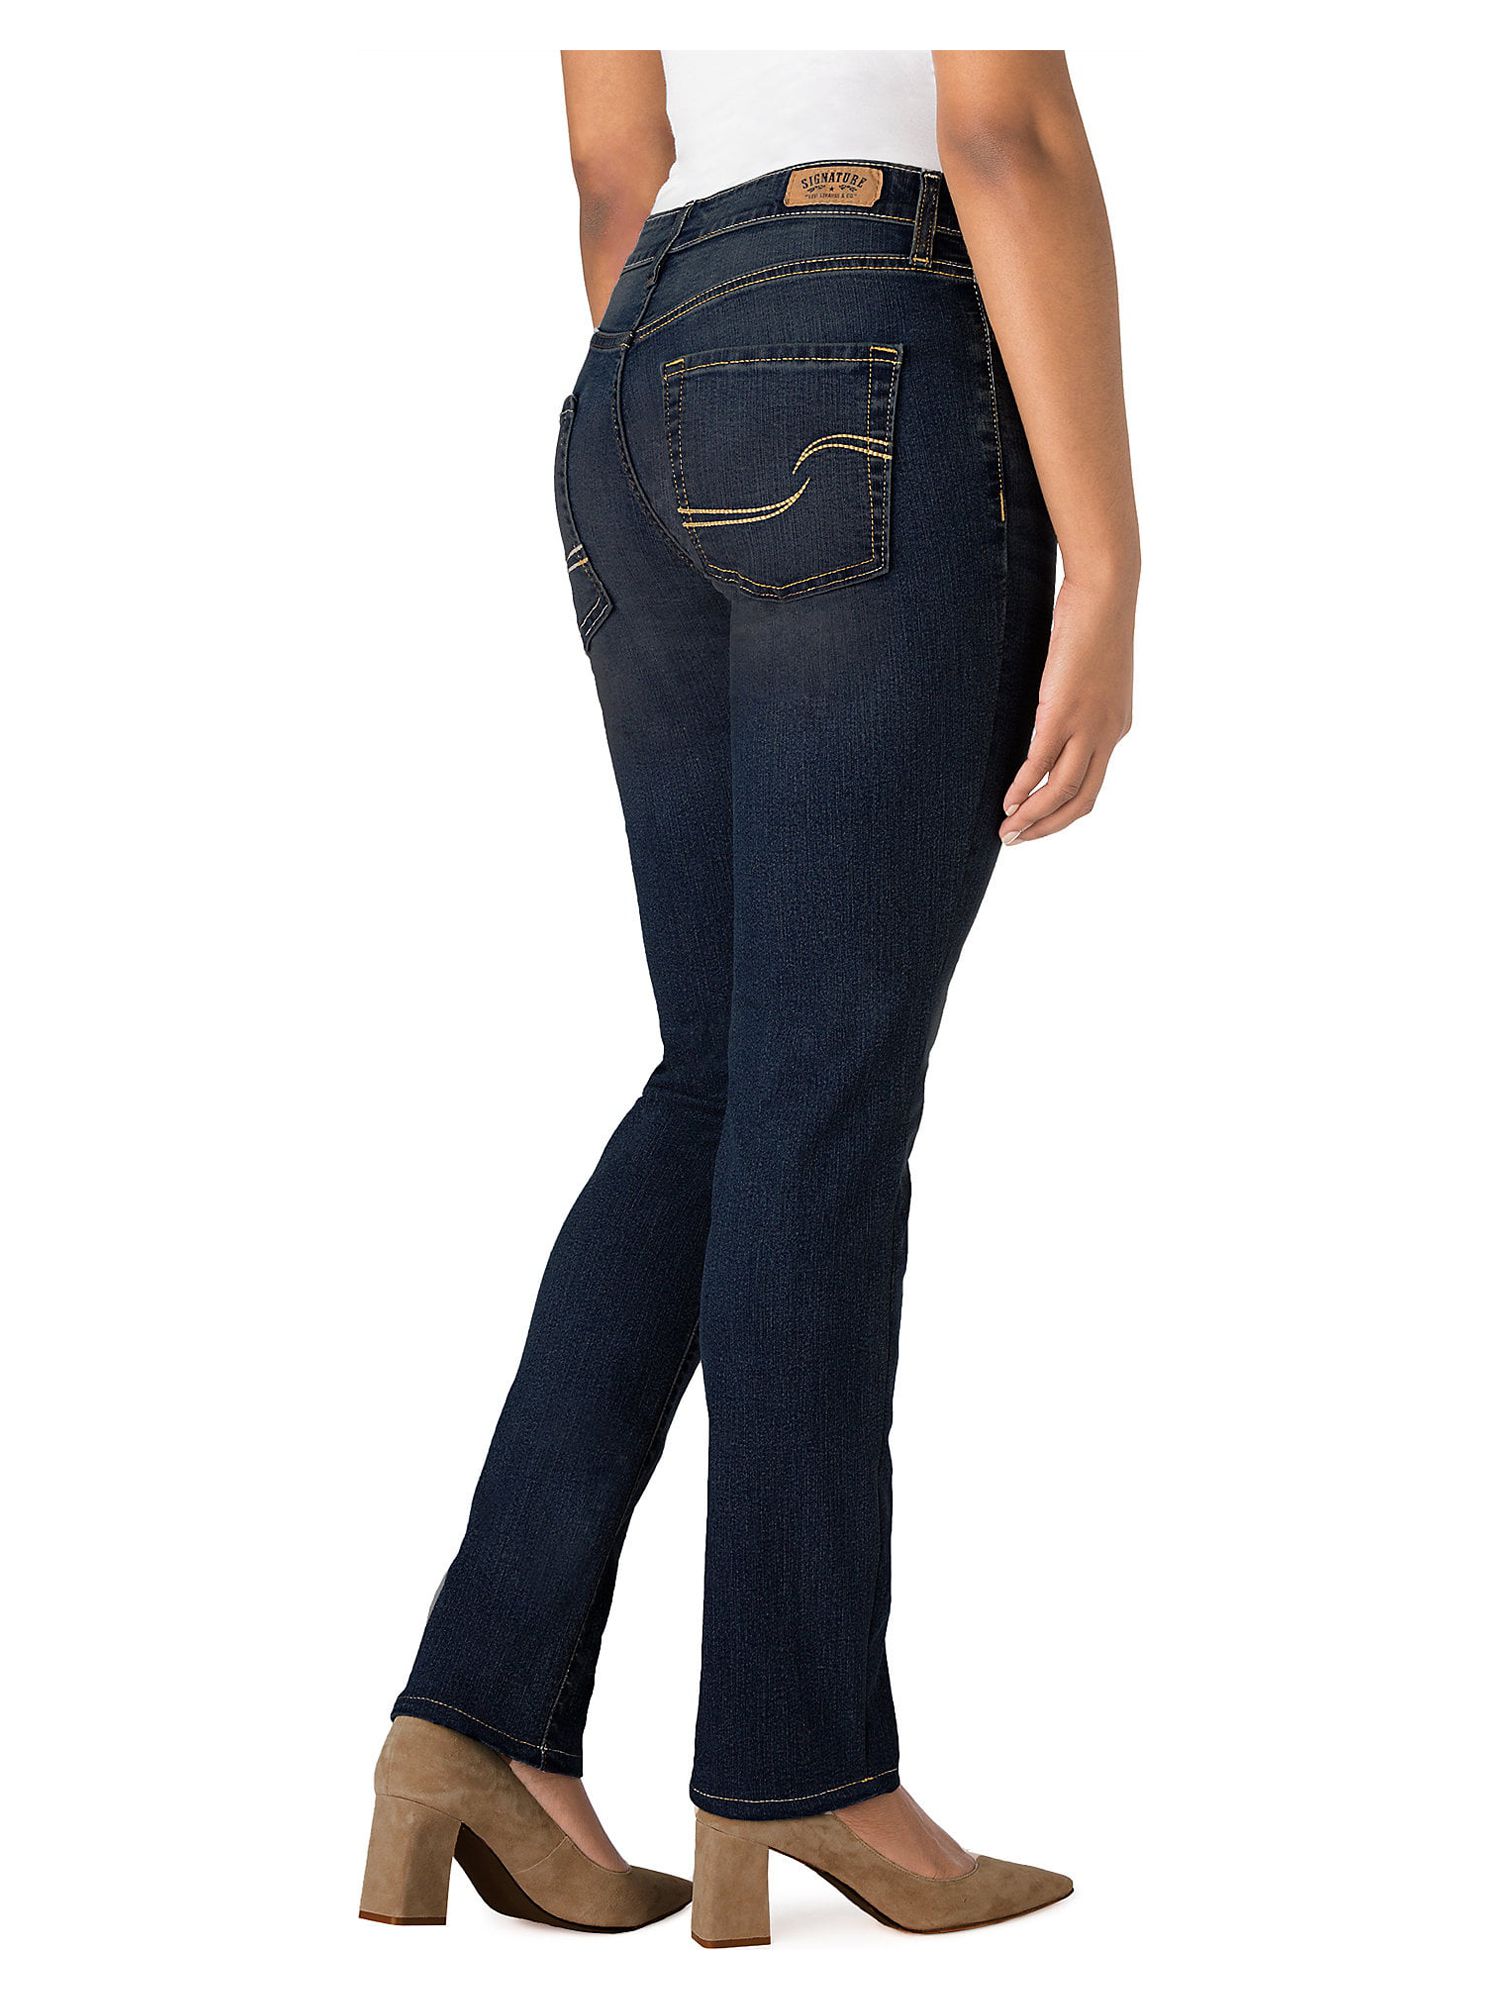 Signature by Levi Strauss & Co. Women's Modern Mid-Rise Straight Jeans - image 5 of 9